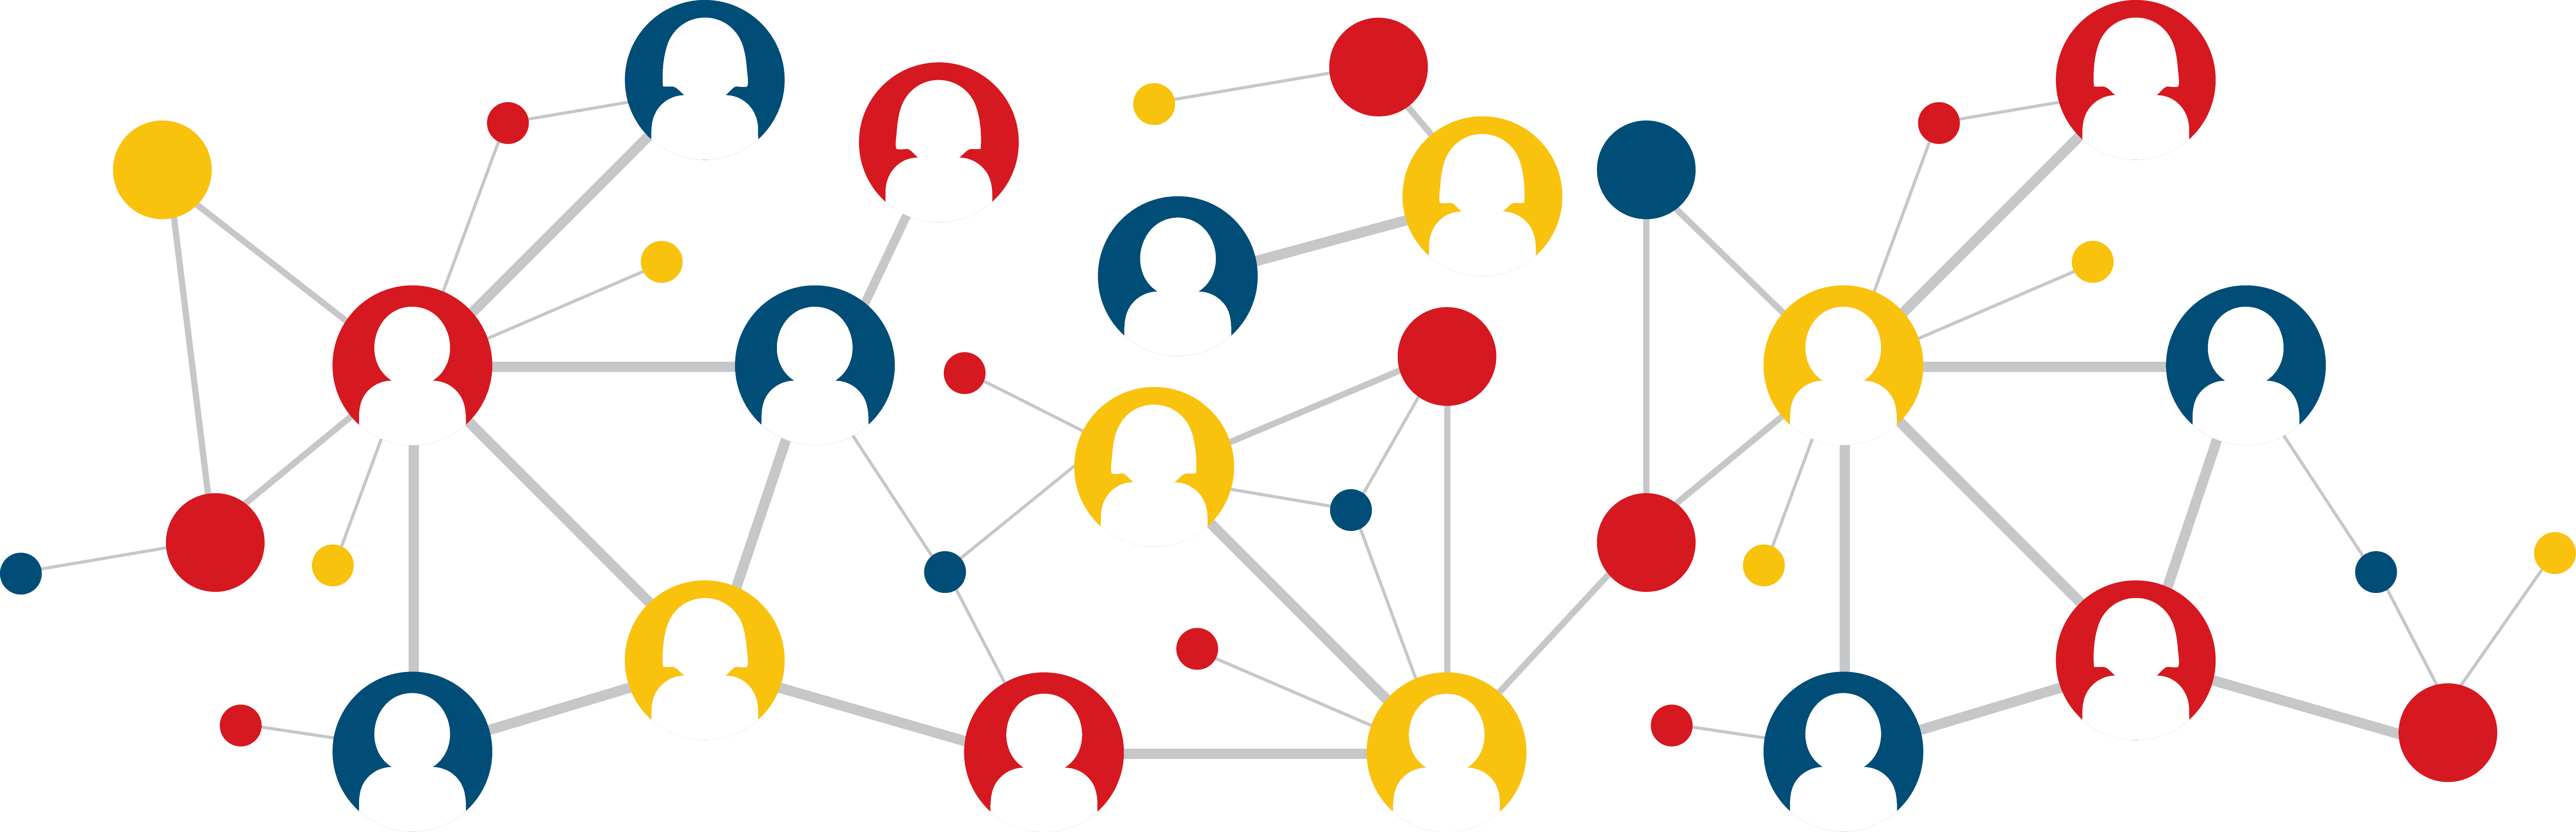 Social Network Connections Graphic PNG